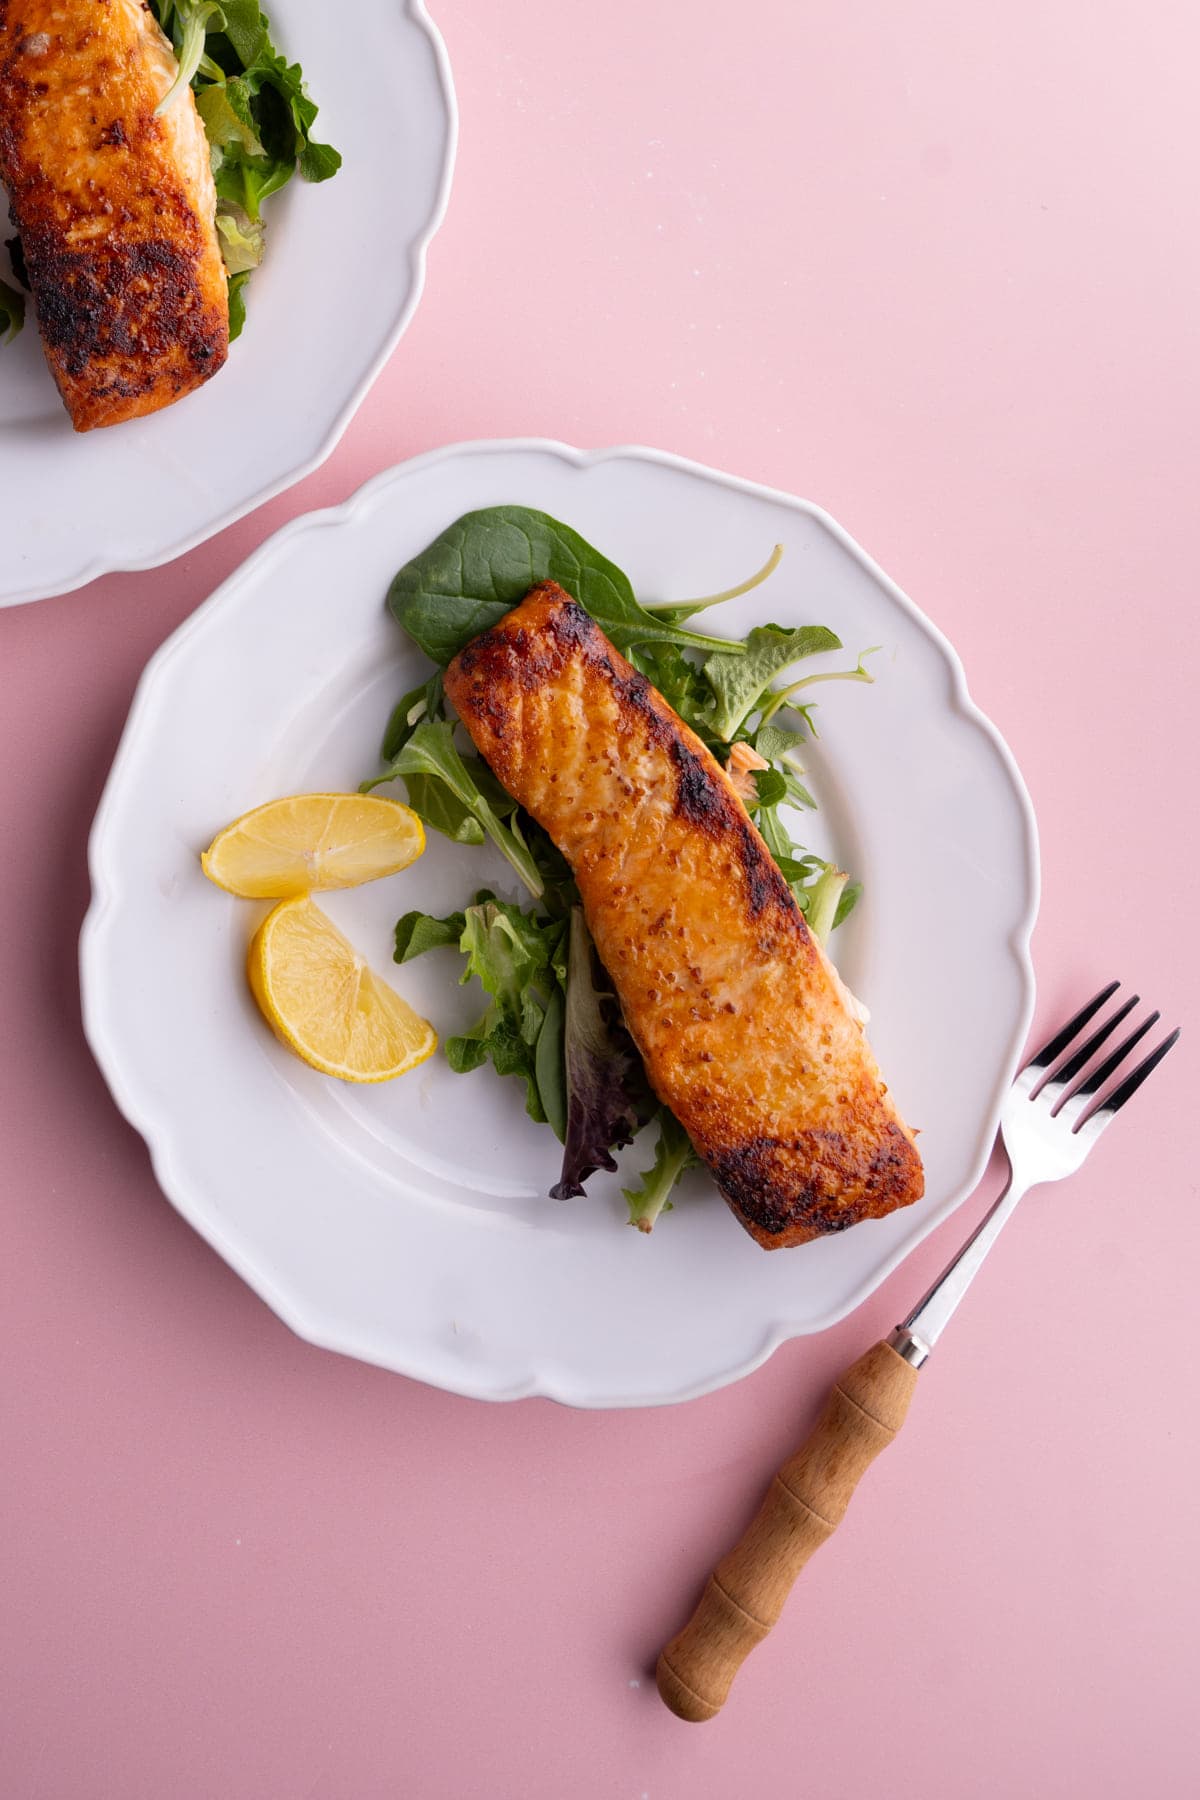 Salmon that was cooked from frozen in the air fryer